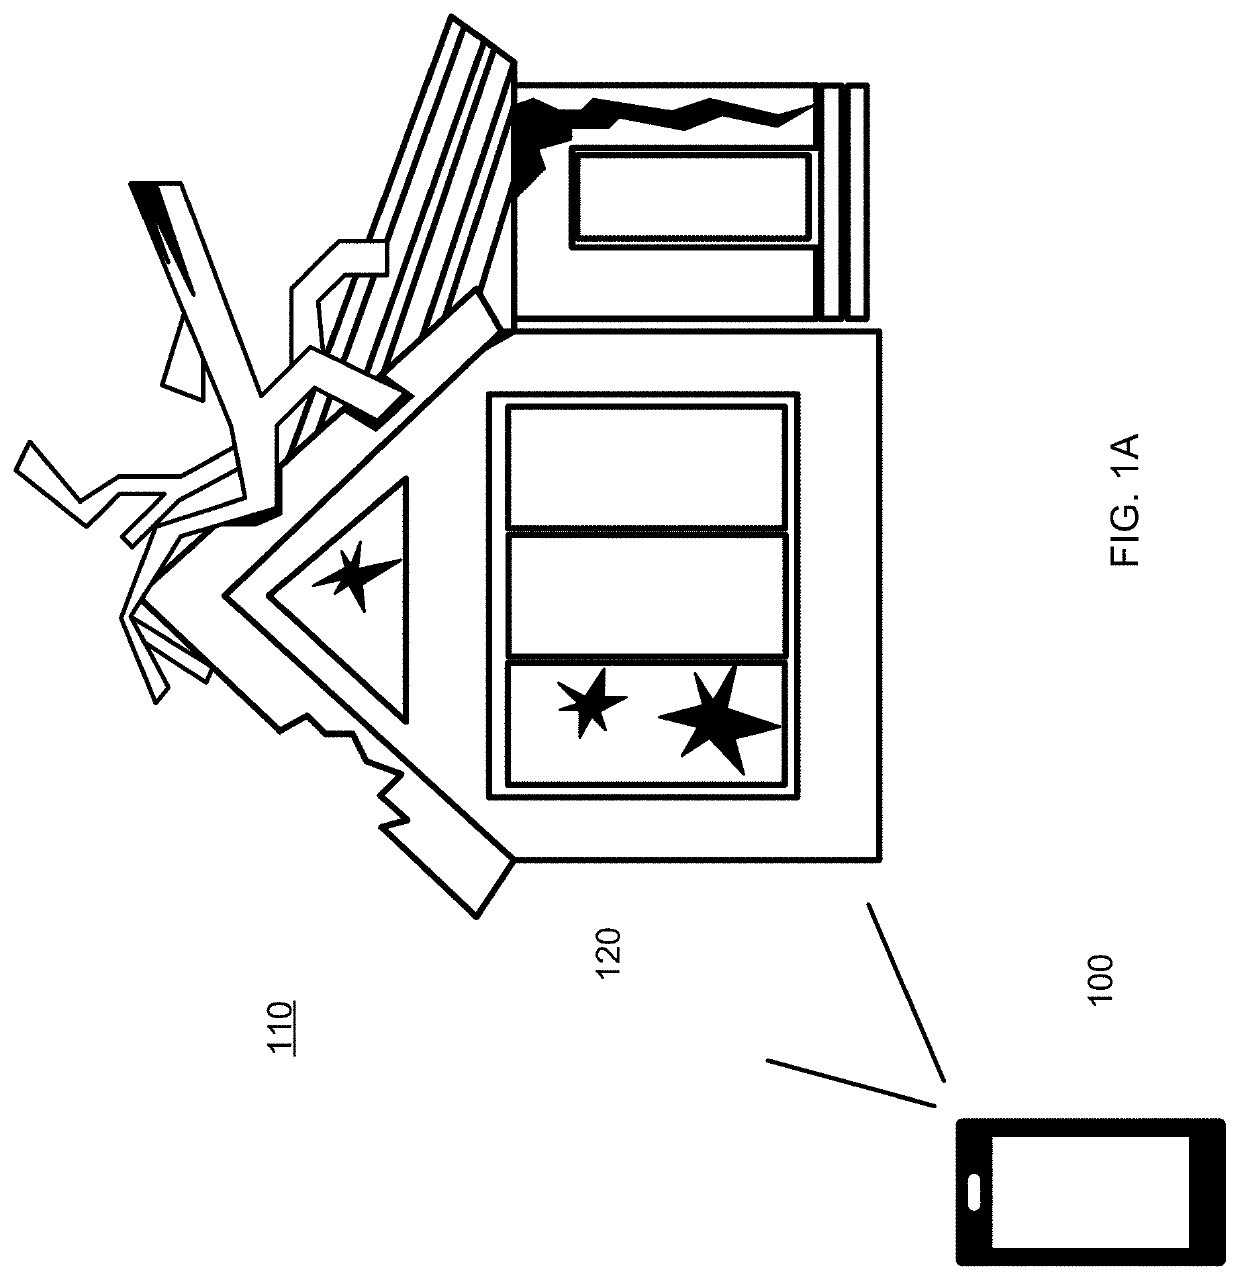 Methods and systems for capturing and transmitting media